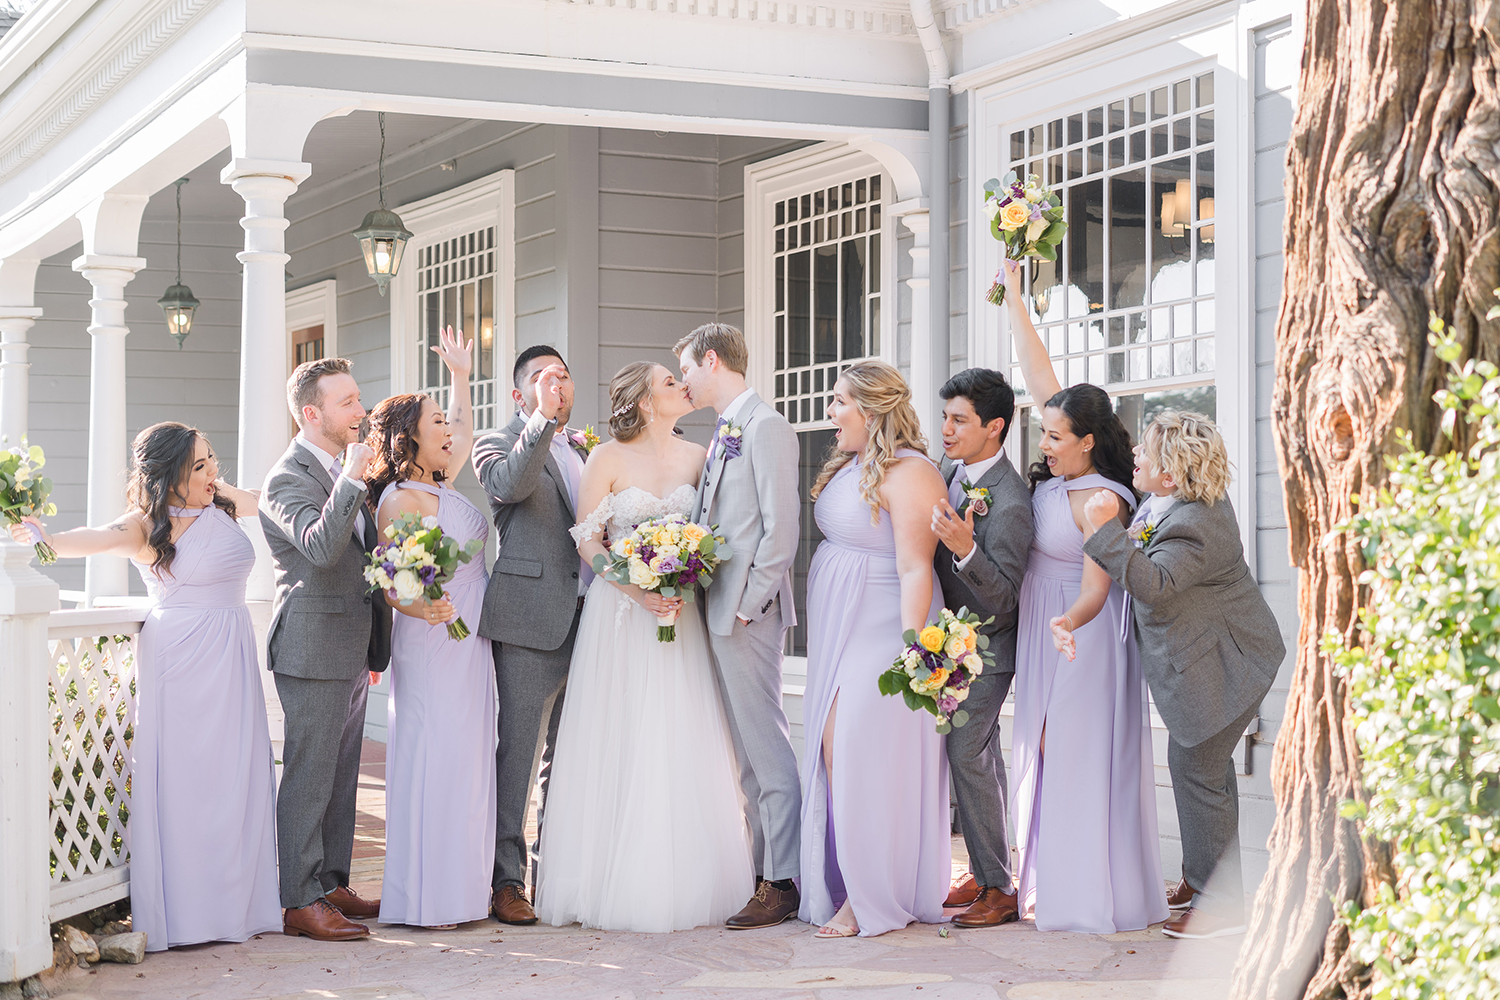 sequoia mansion Placerville wedding bridal party wedding party portraits by Napa Wedding Photographer Adrienne & Dani